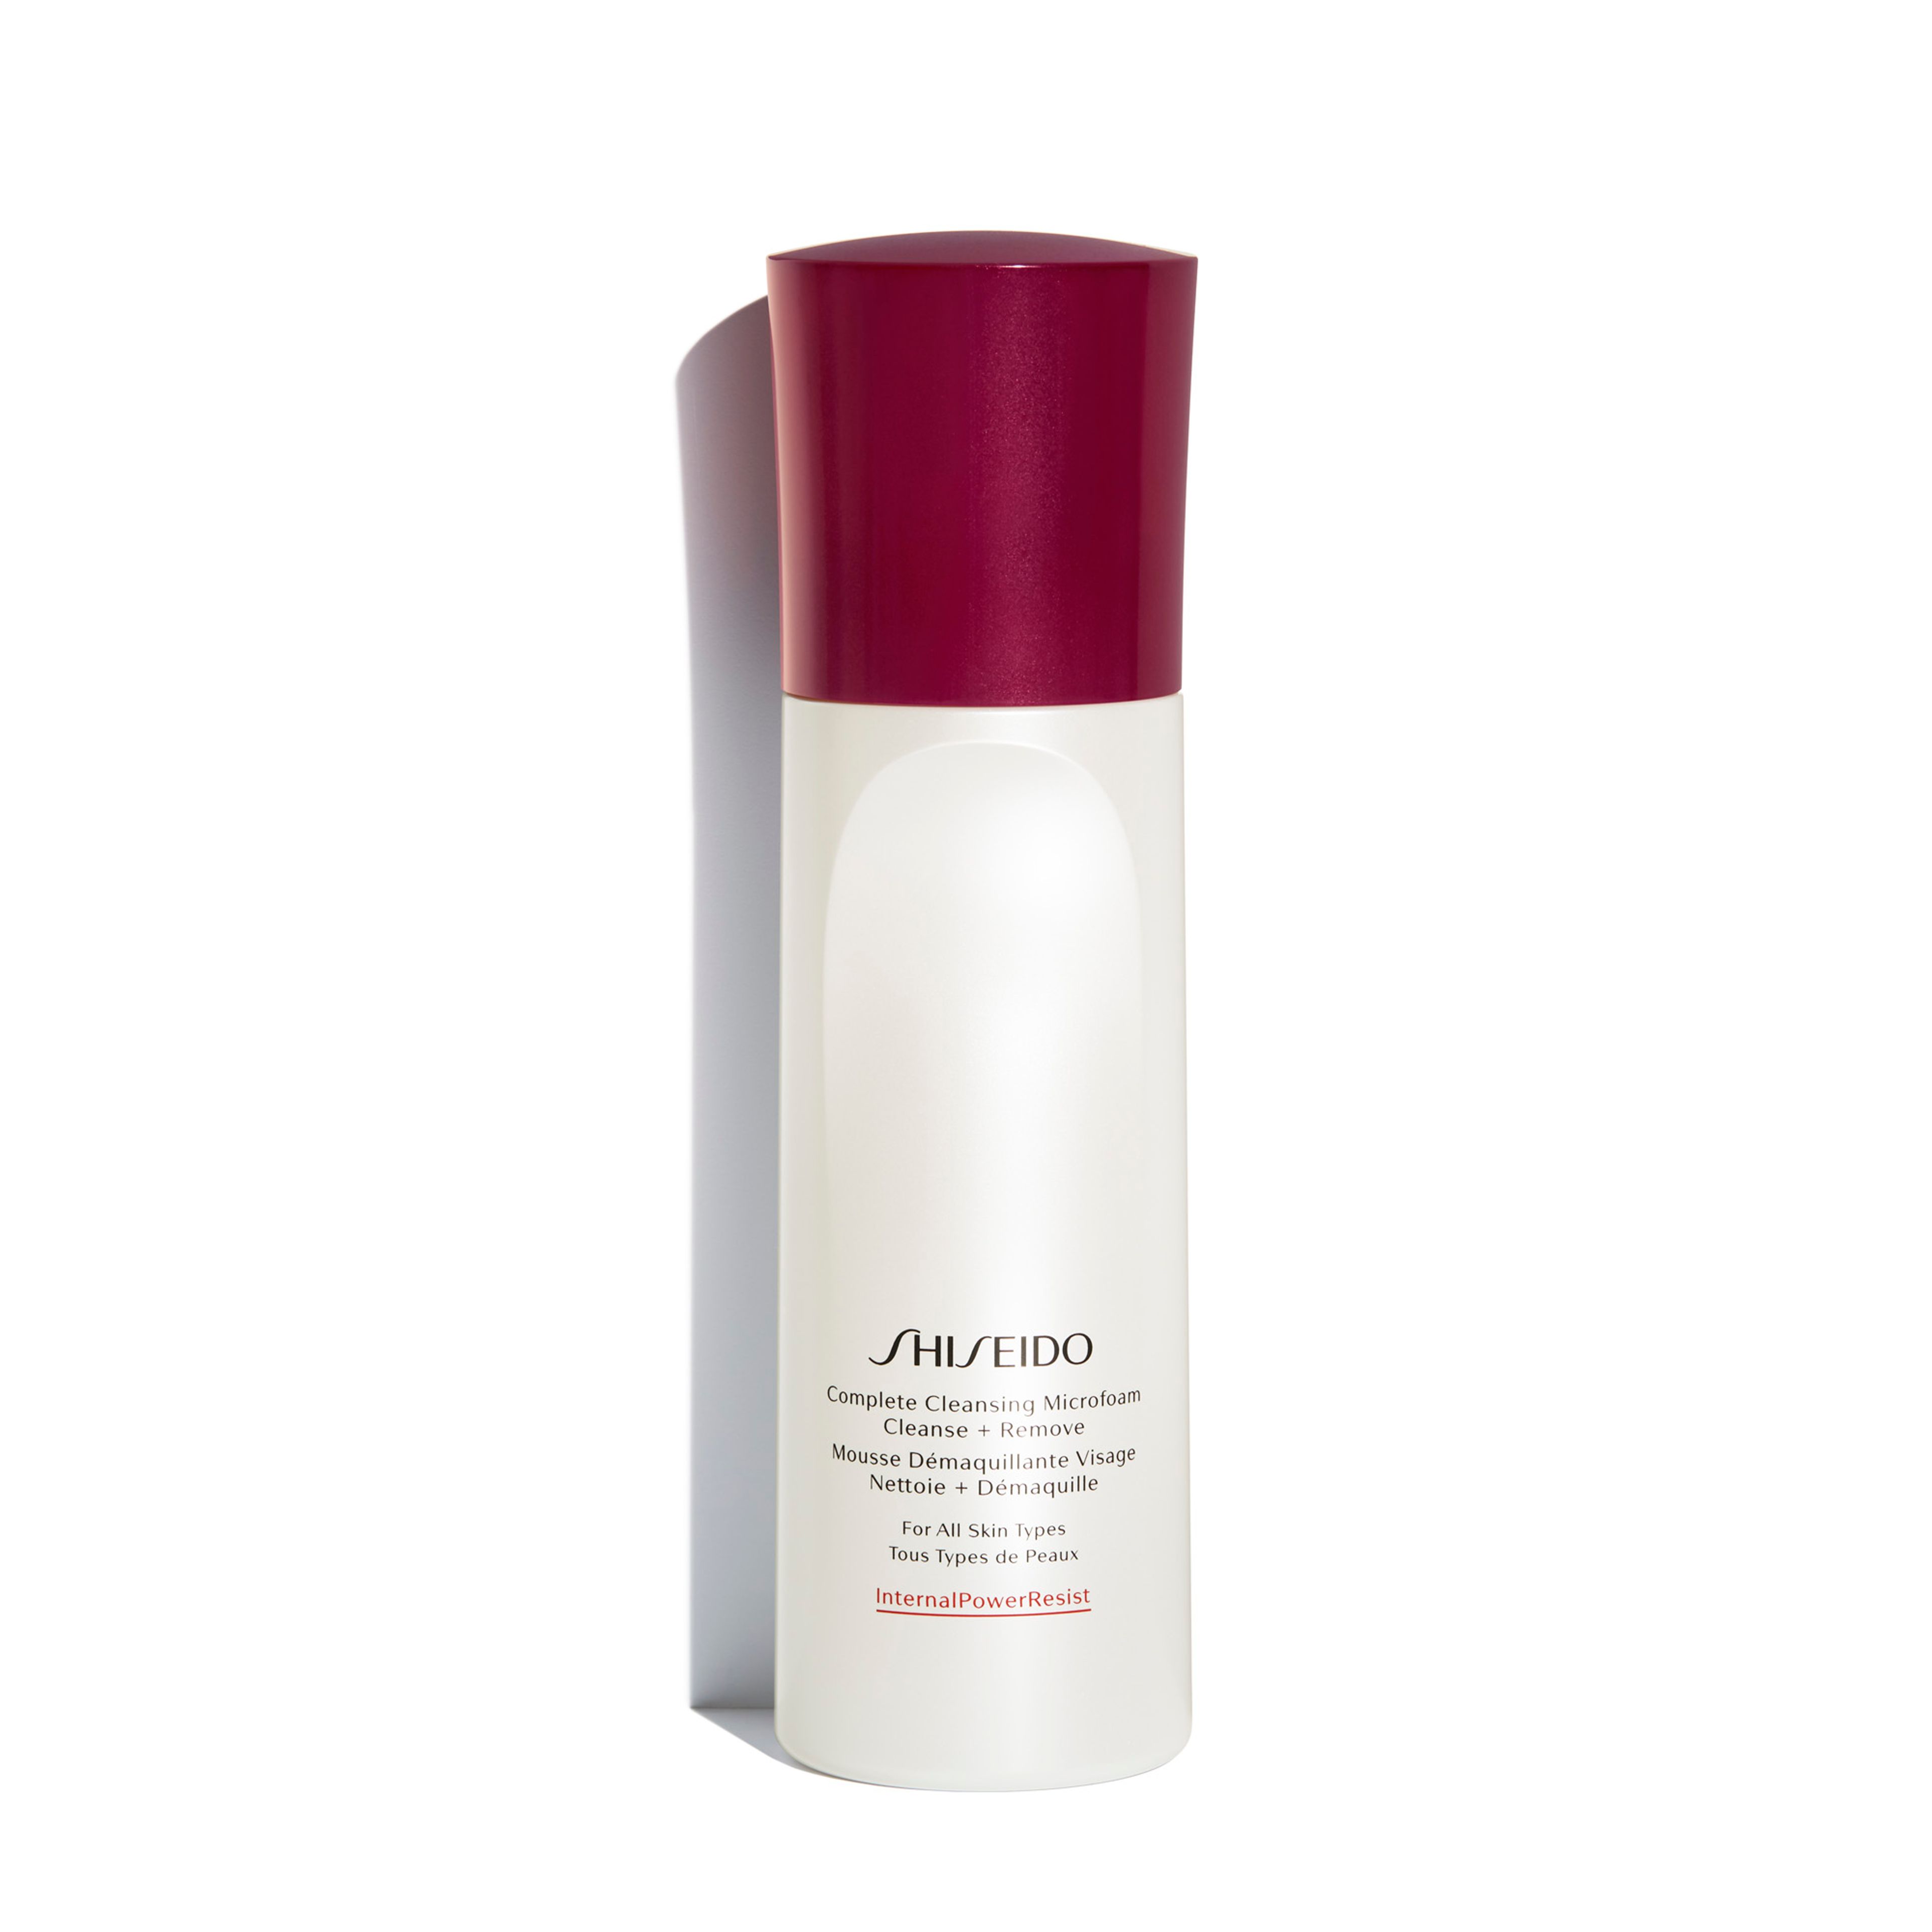 Shiseido Complete Cleansing Microfoam 1